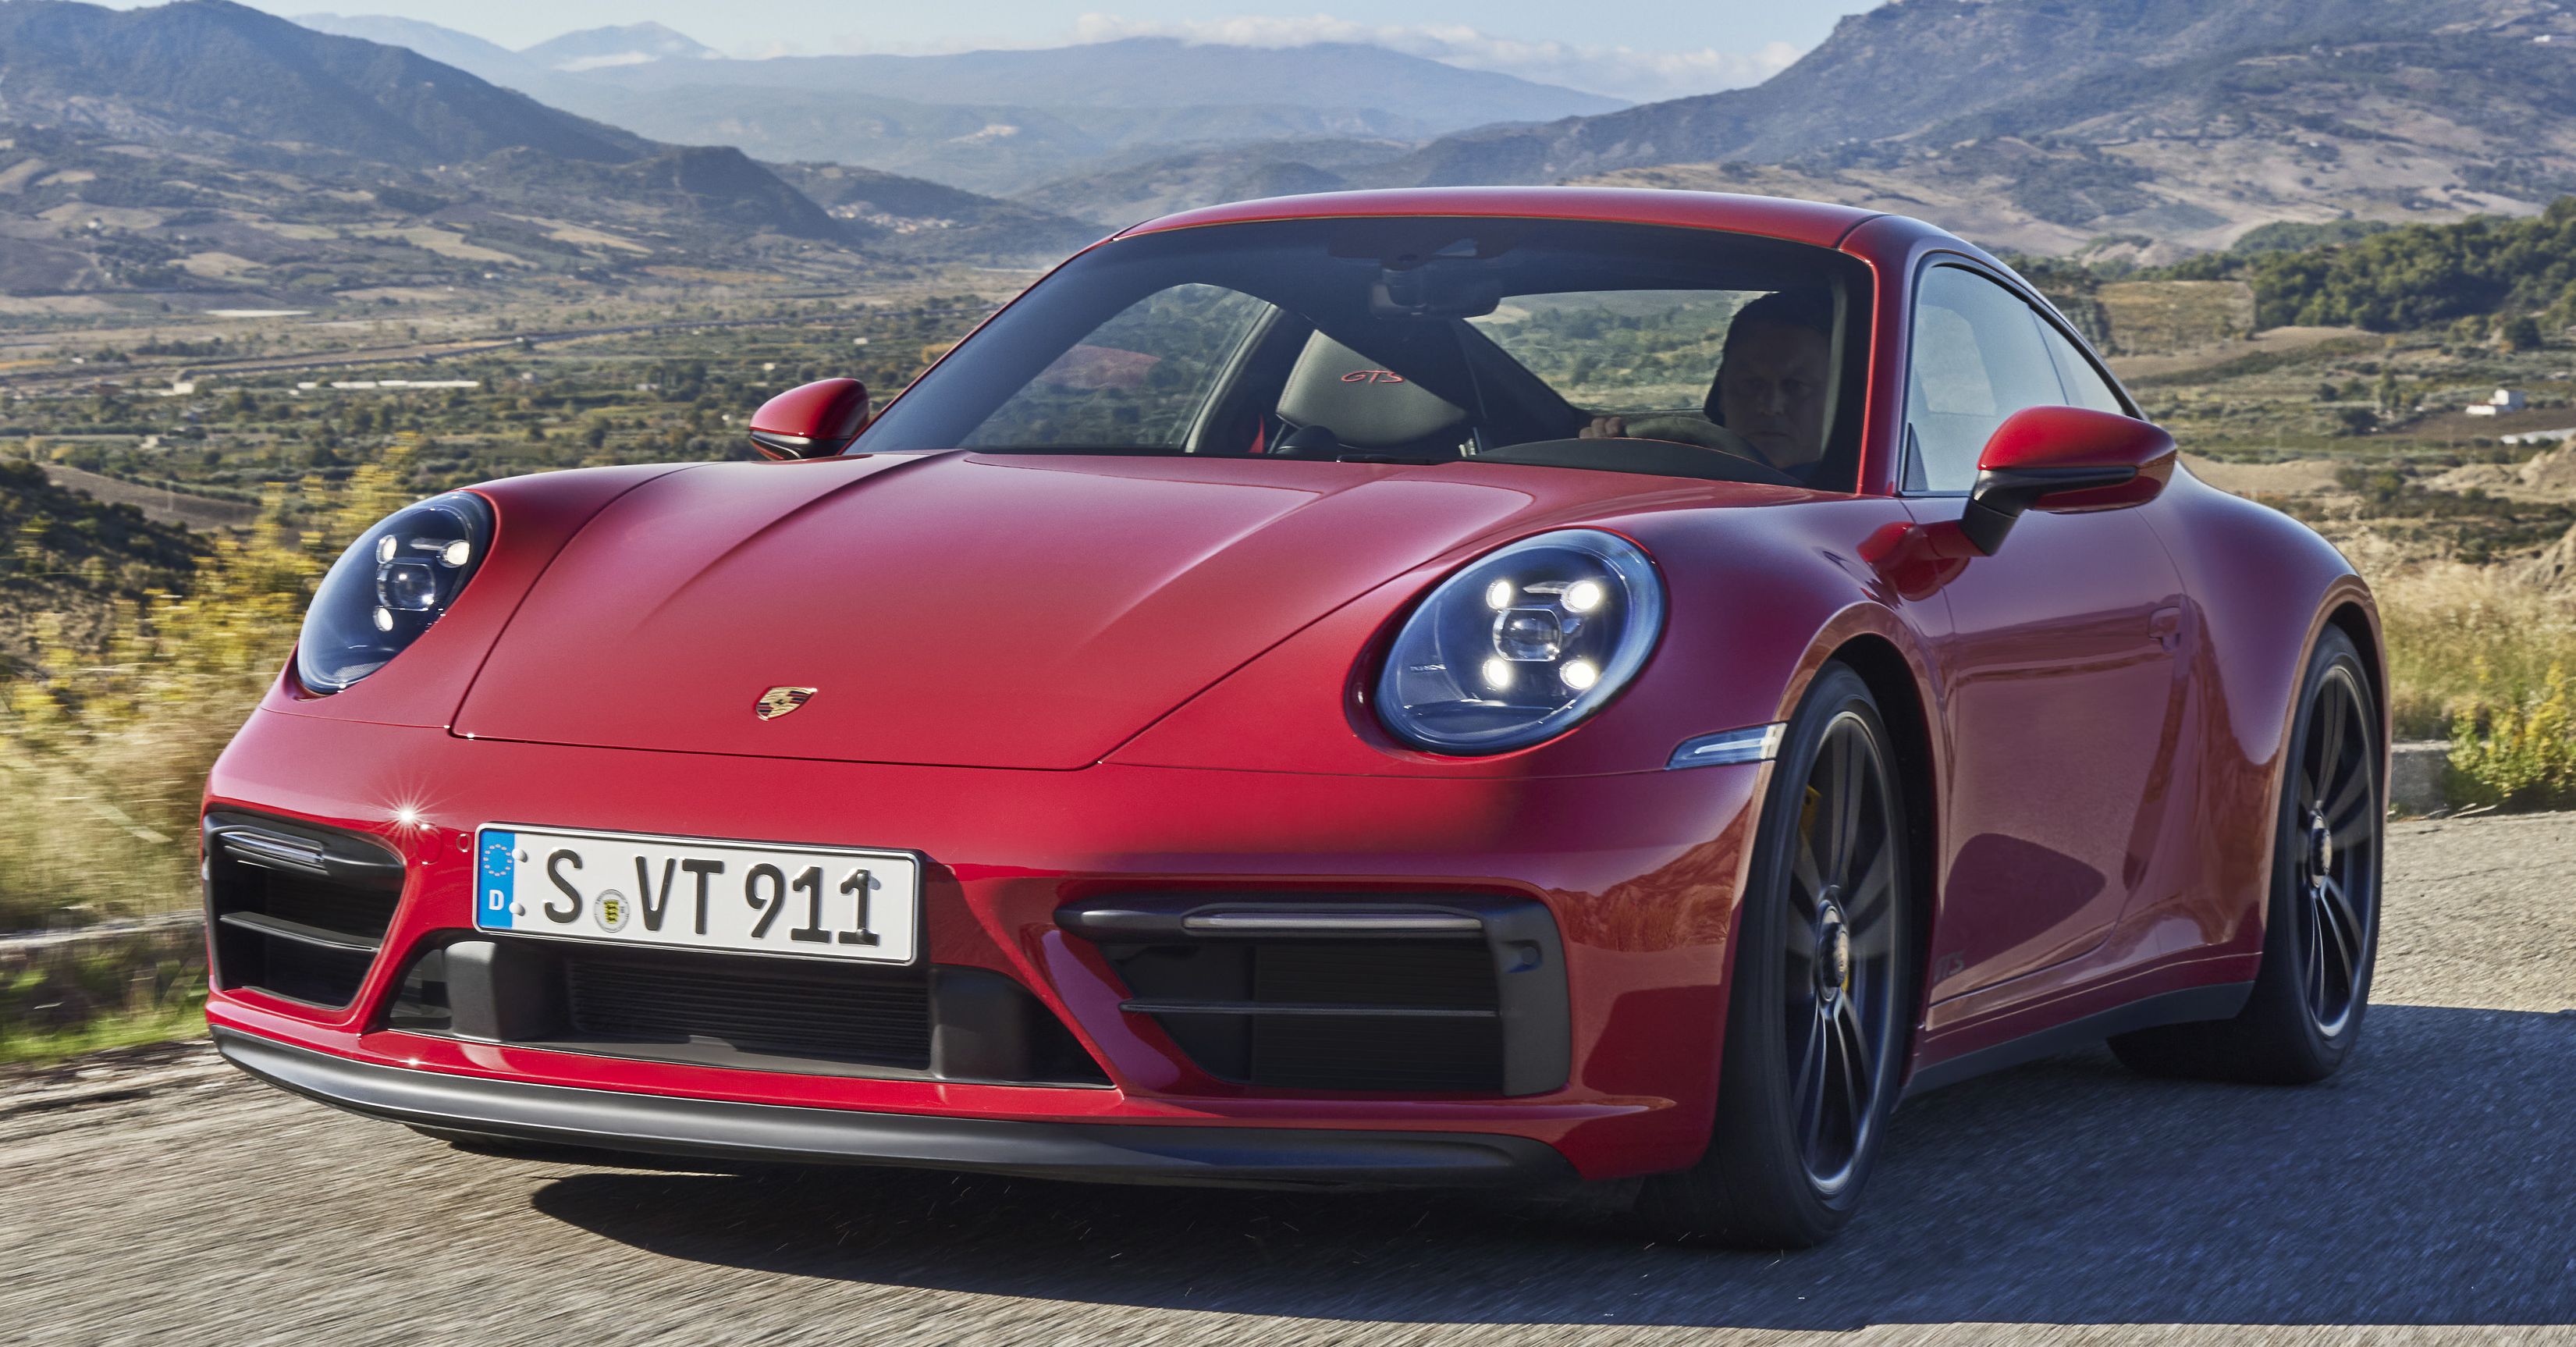 992 Porsche 911 GTS debuts - 480 PS and 570 Nm, available Lightweight  Design package saves 25 kg 